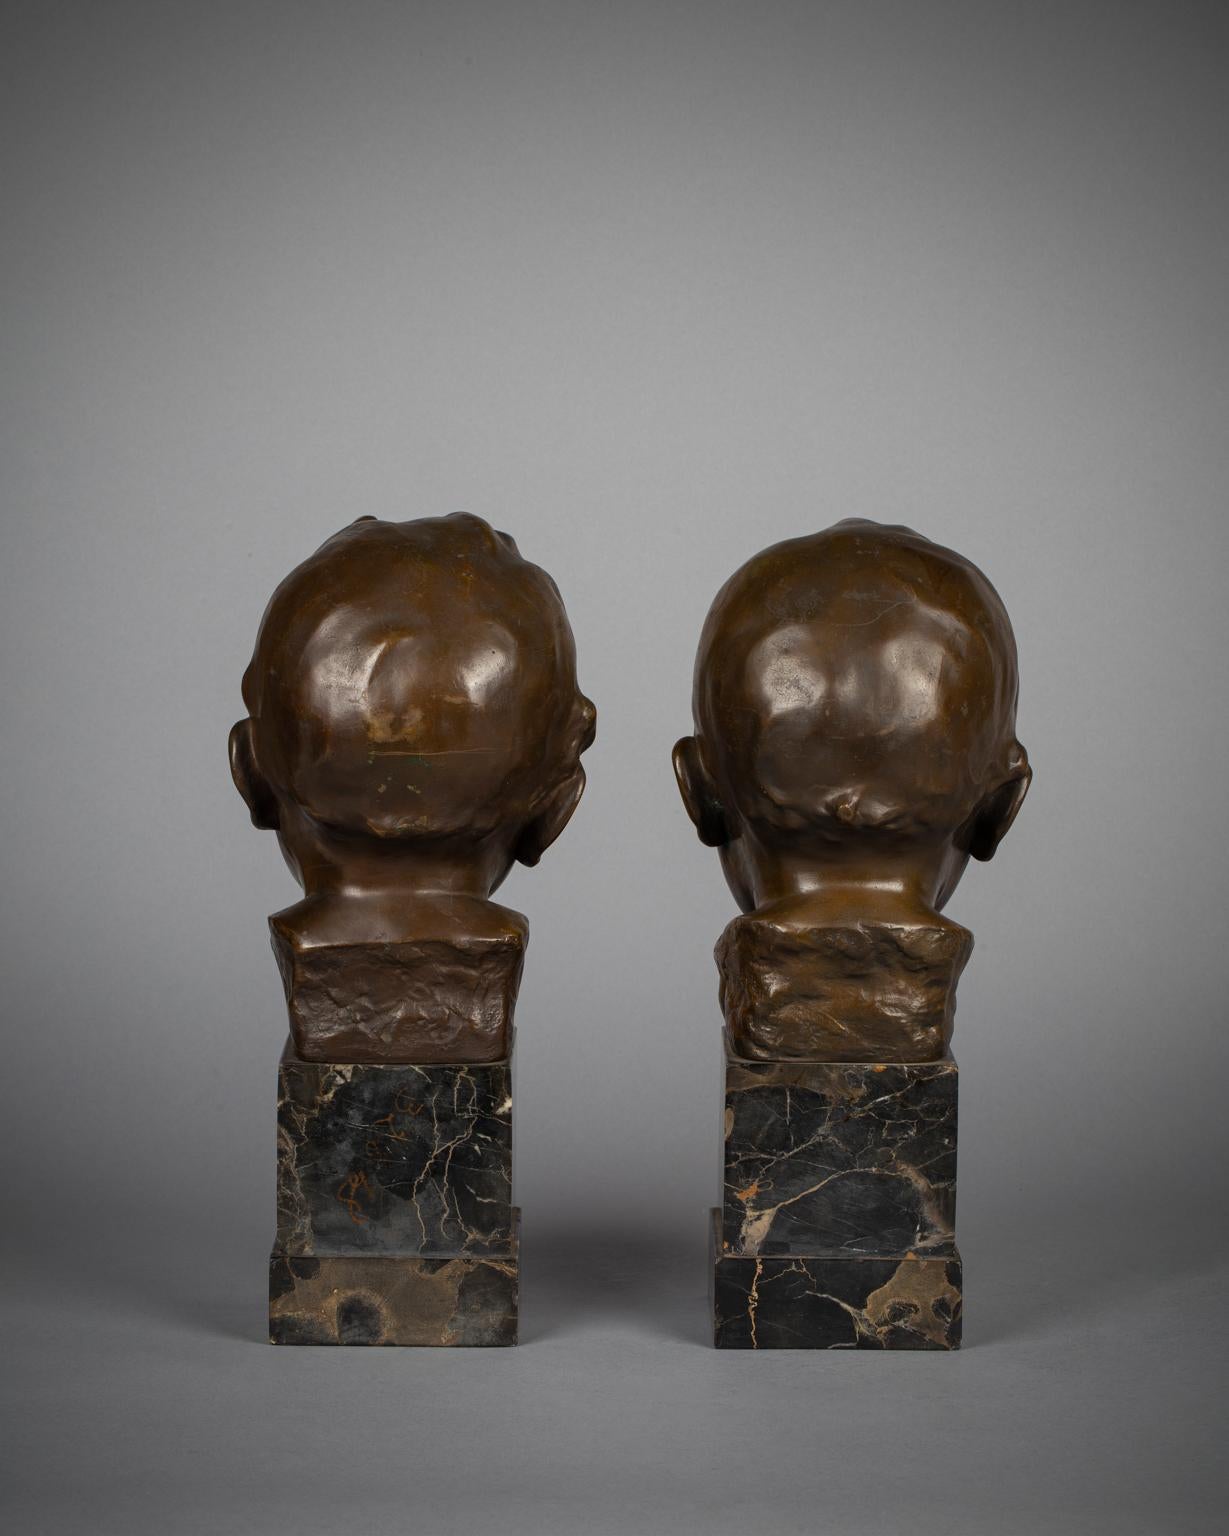 Pair of Bronze Busts on Marble Stands of Babies, by Victor Heinrich Seifert (1870-1953)